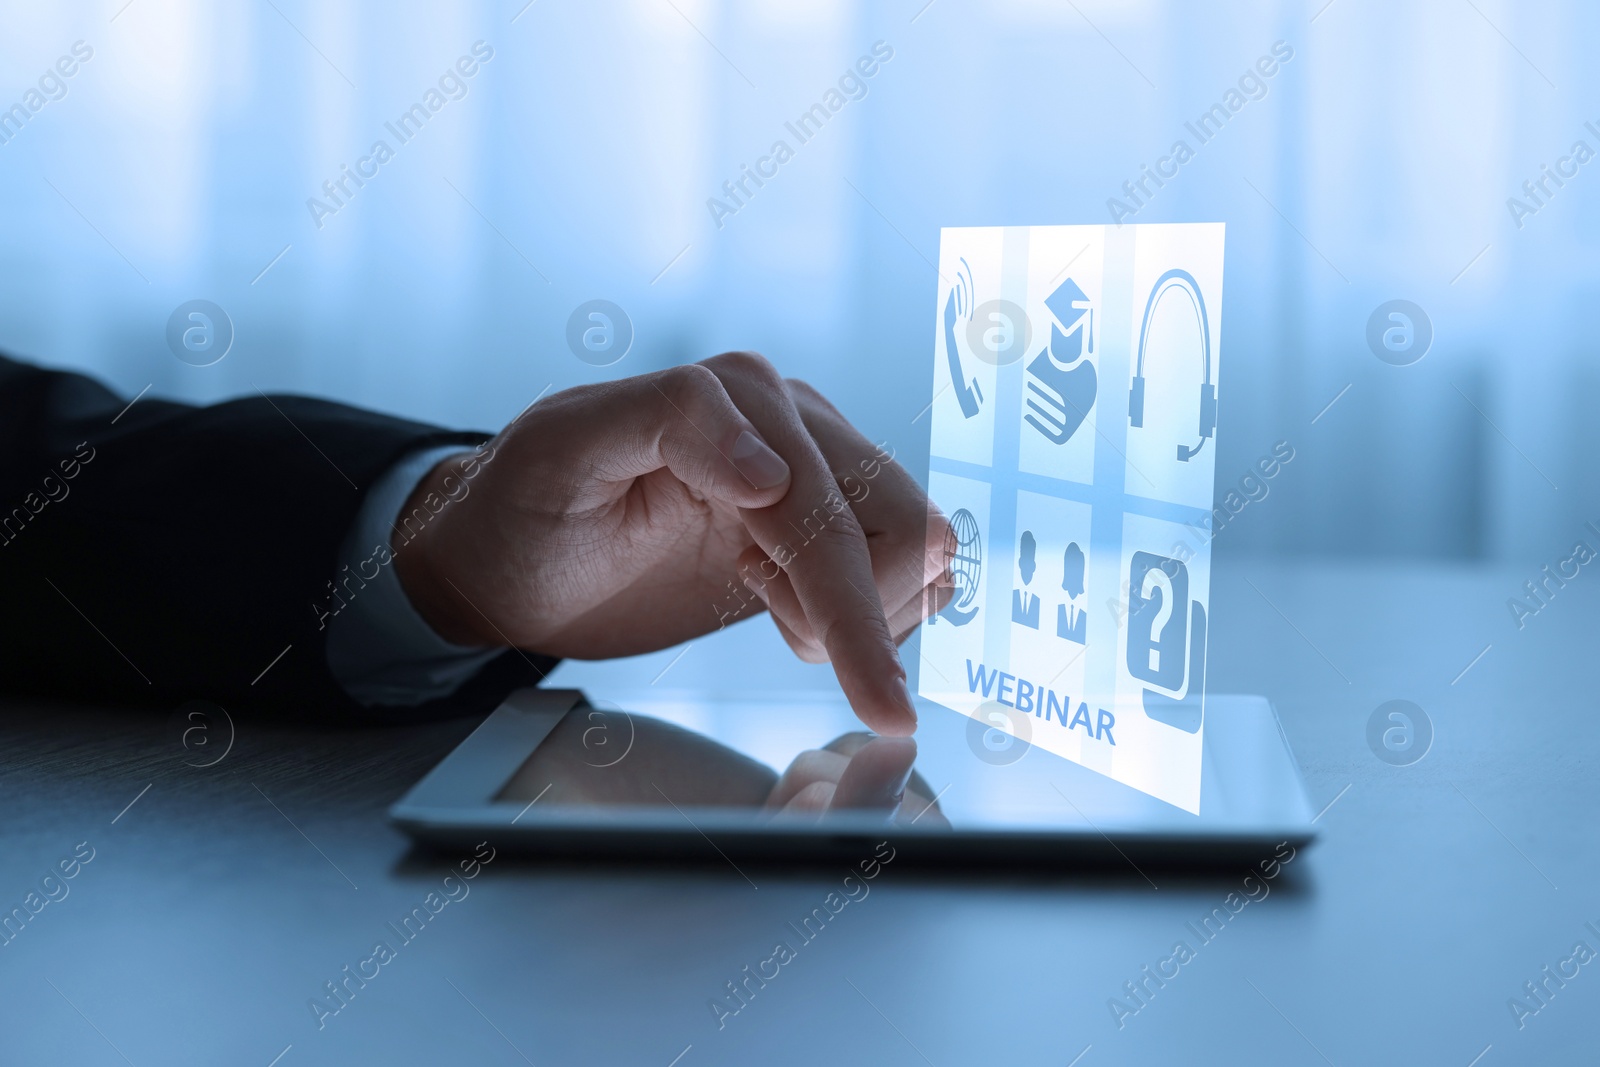 Image of Webinar. Man using tablet at table, closeup. Virtual screen with icons over computer